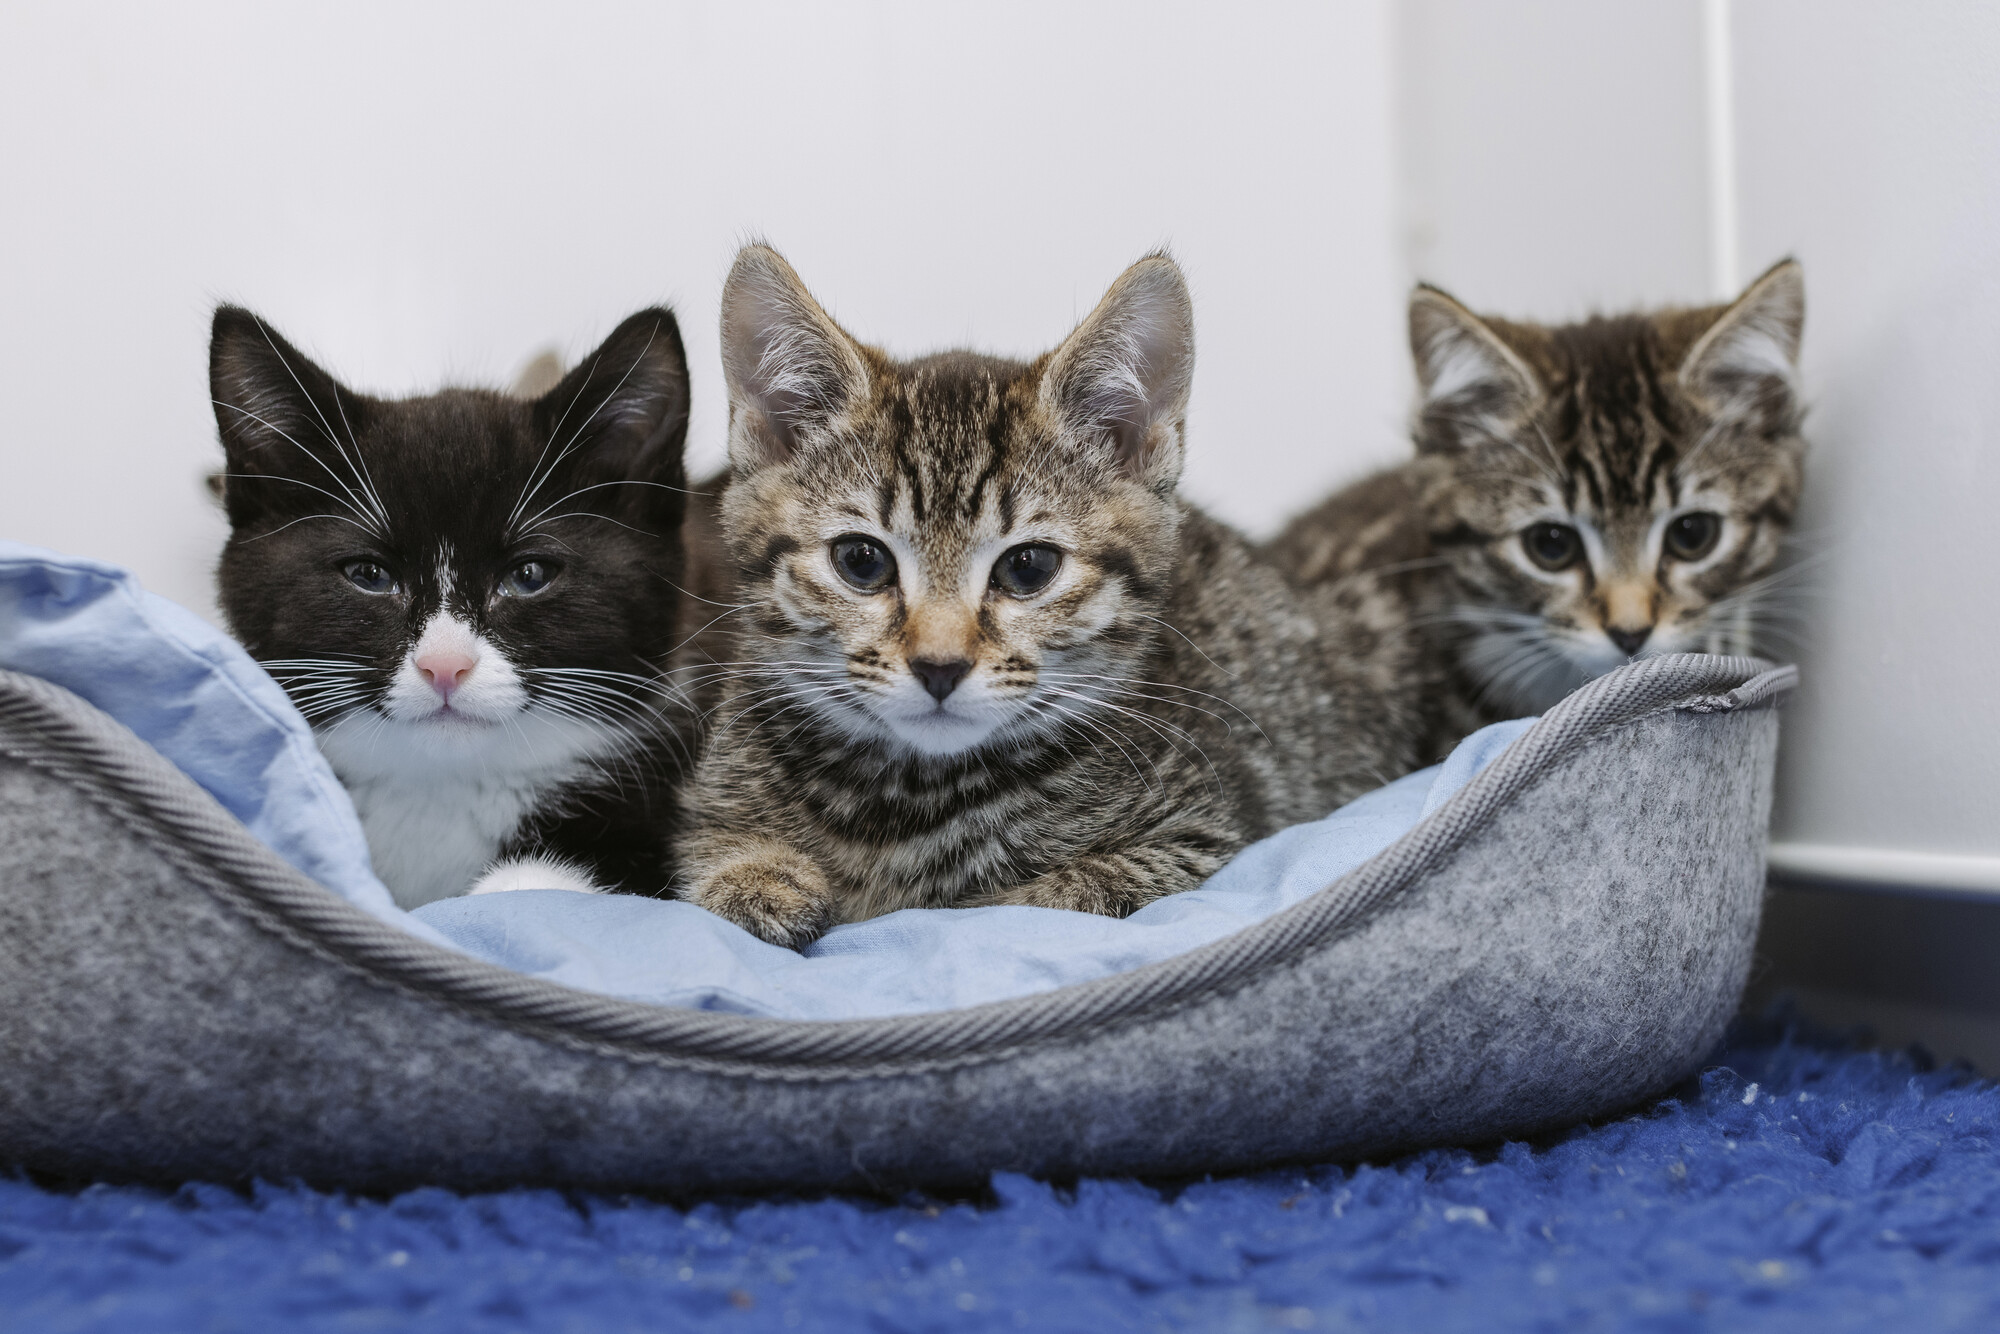 Three of the kittens lying in a blue and grey bed looking to camera